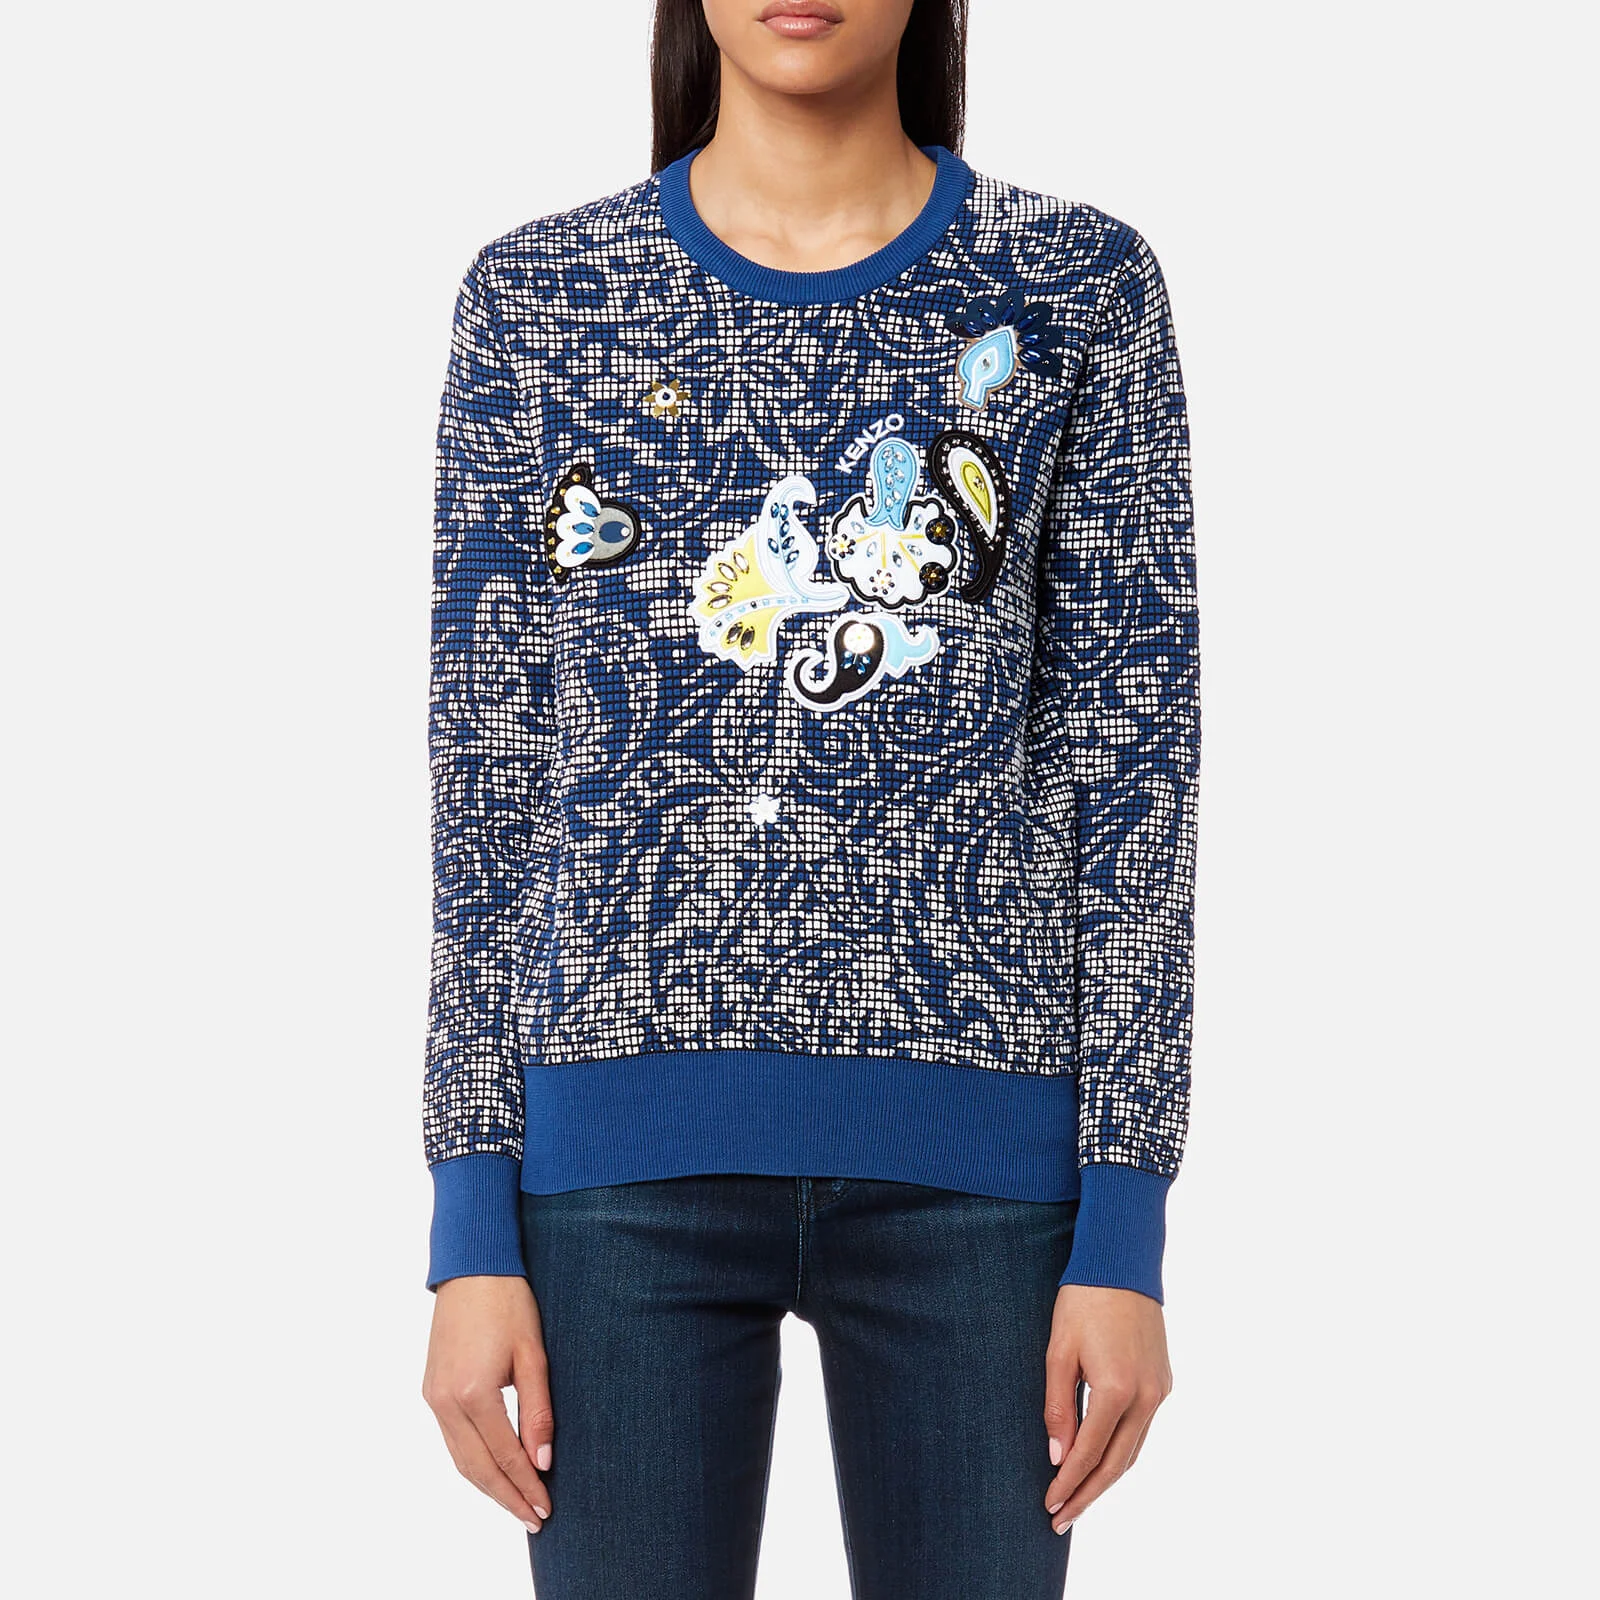 KENZO Women's Embroidered Paisley Jumper - French Blue Image 1